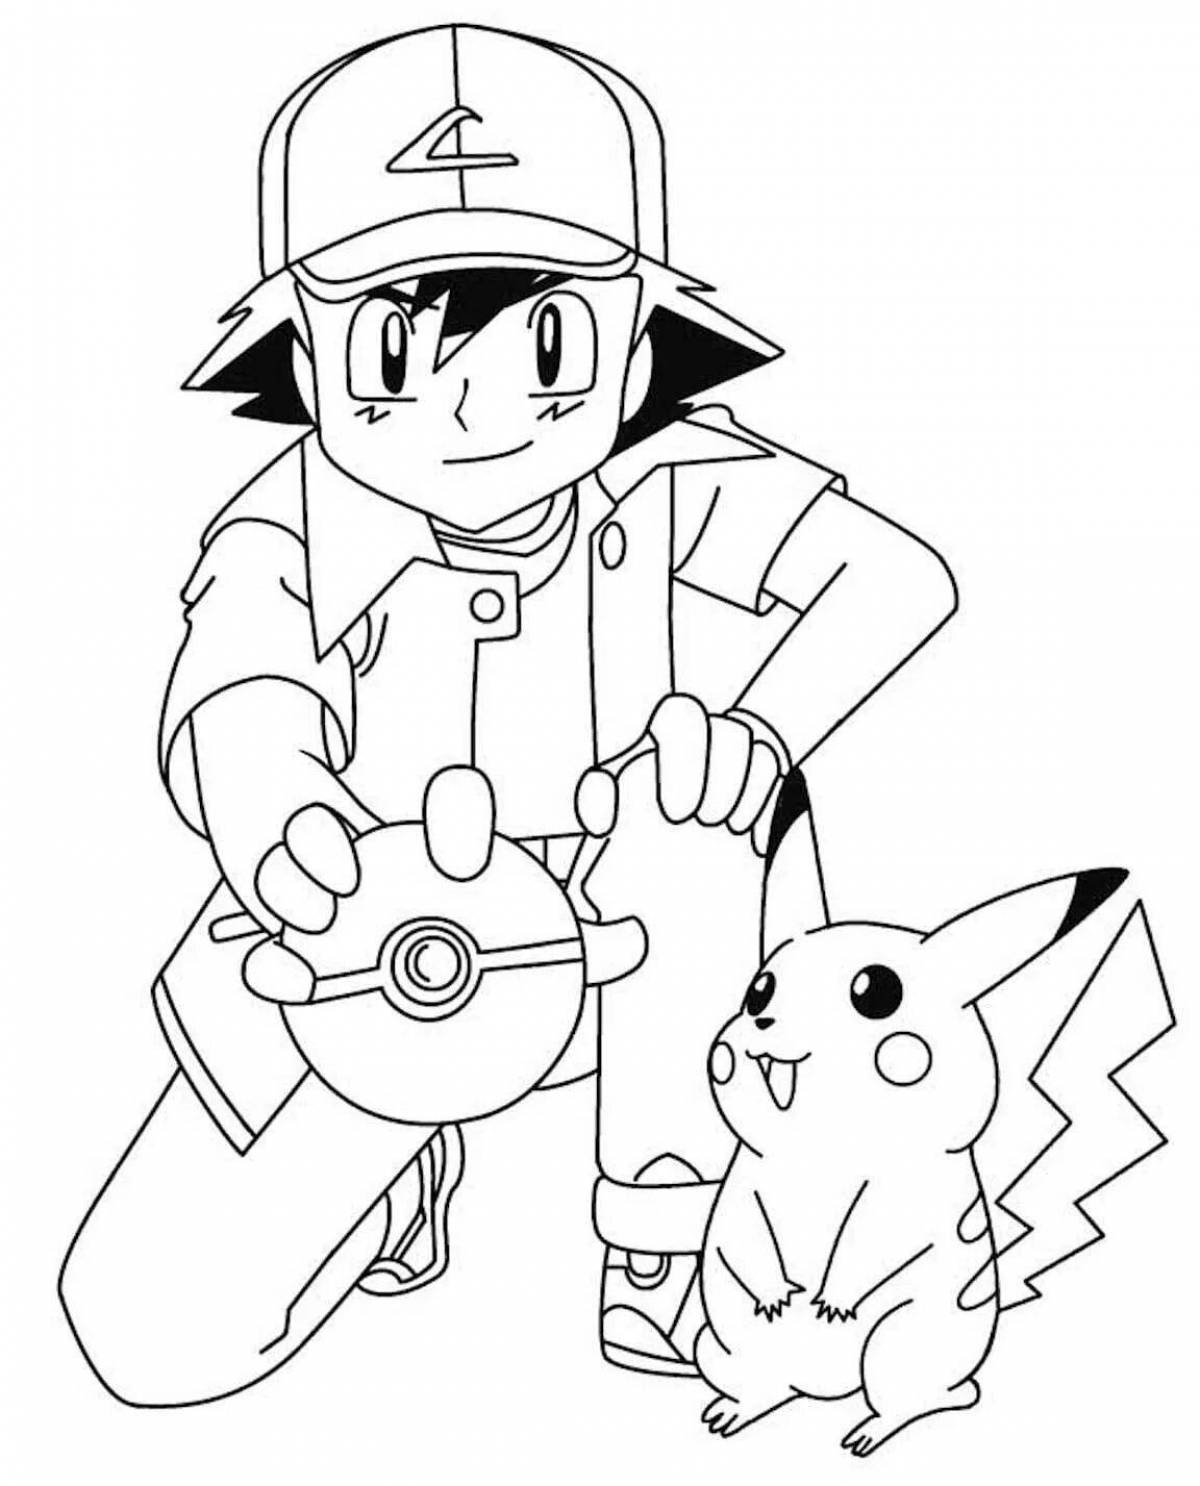 Colorful pikachu coloring page